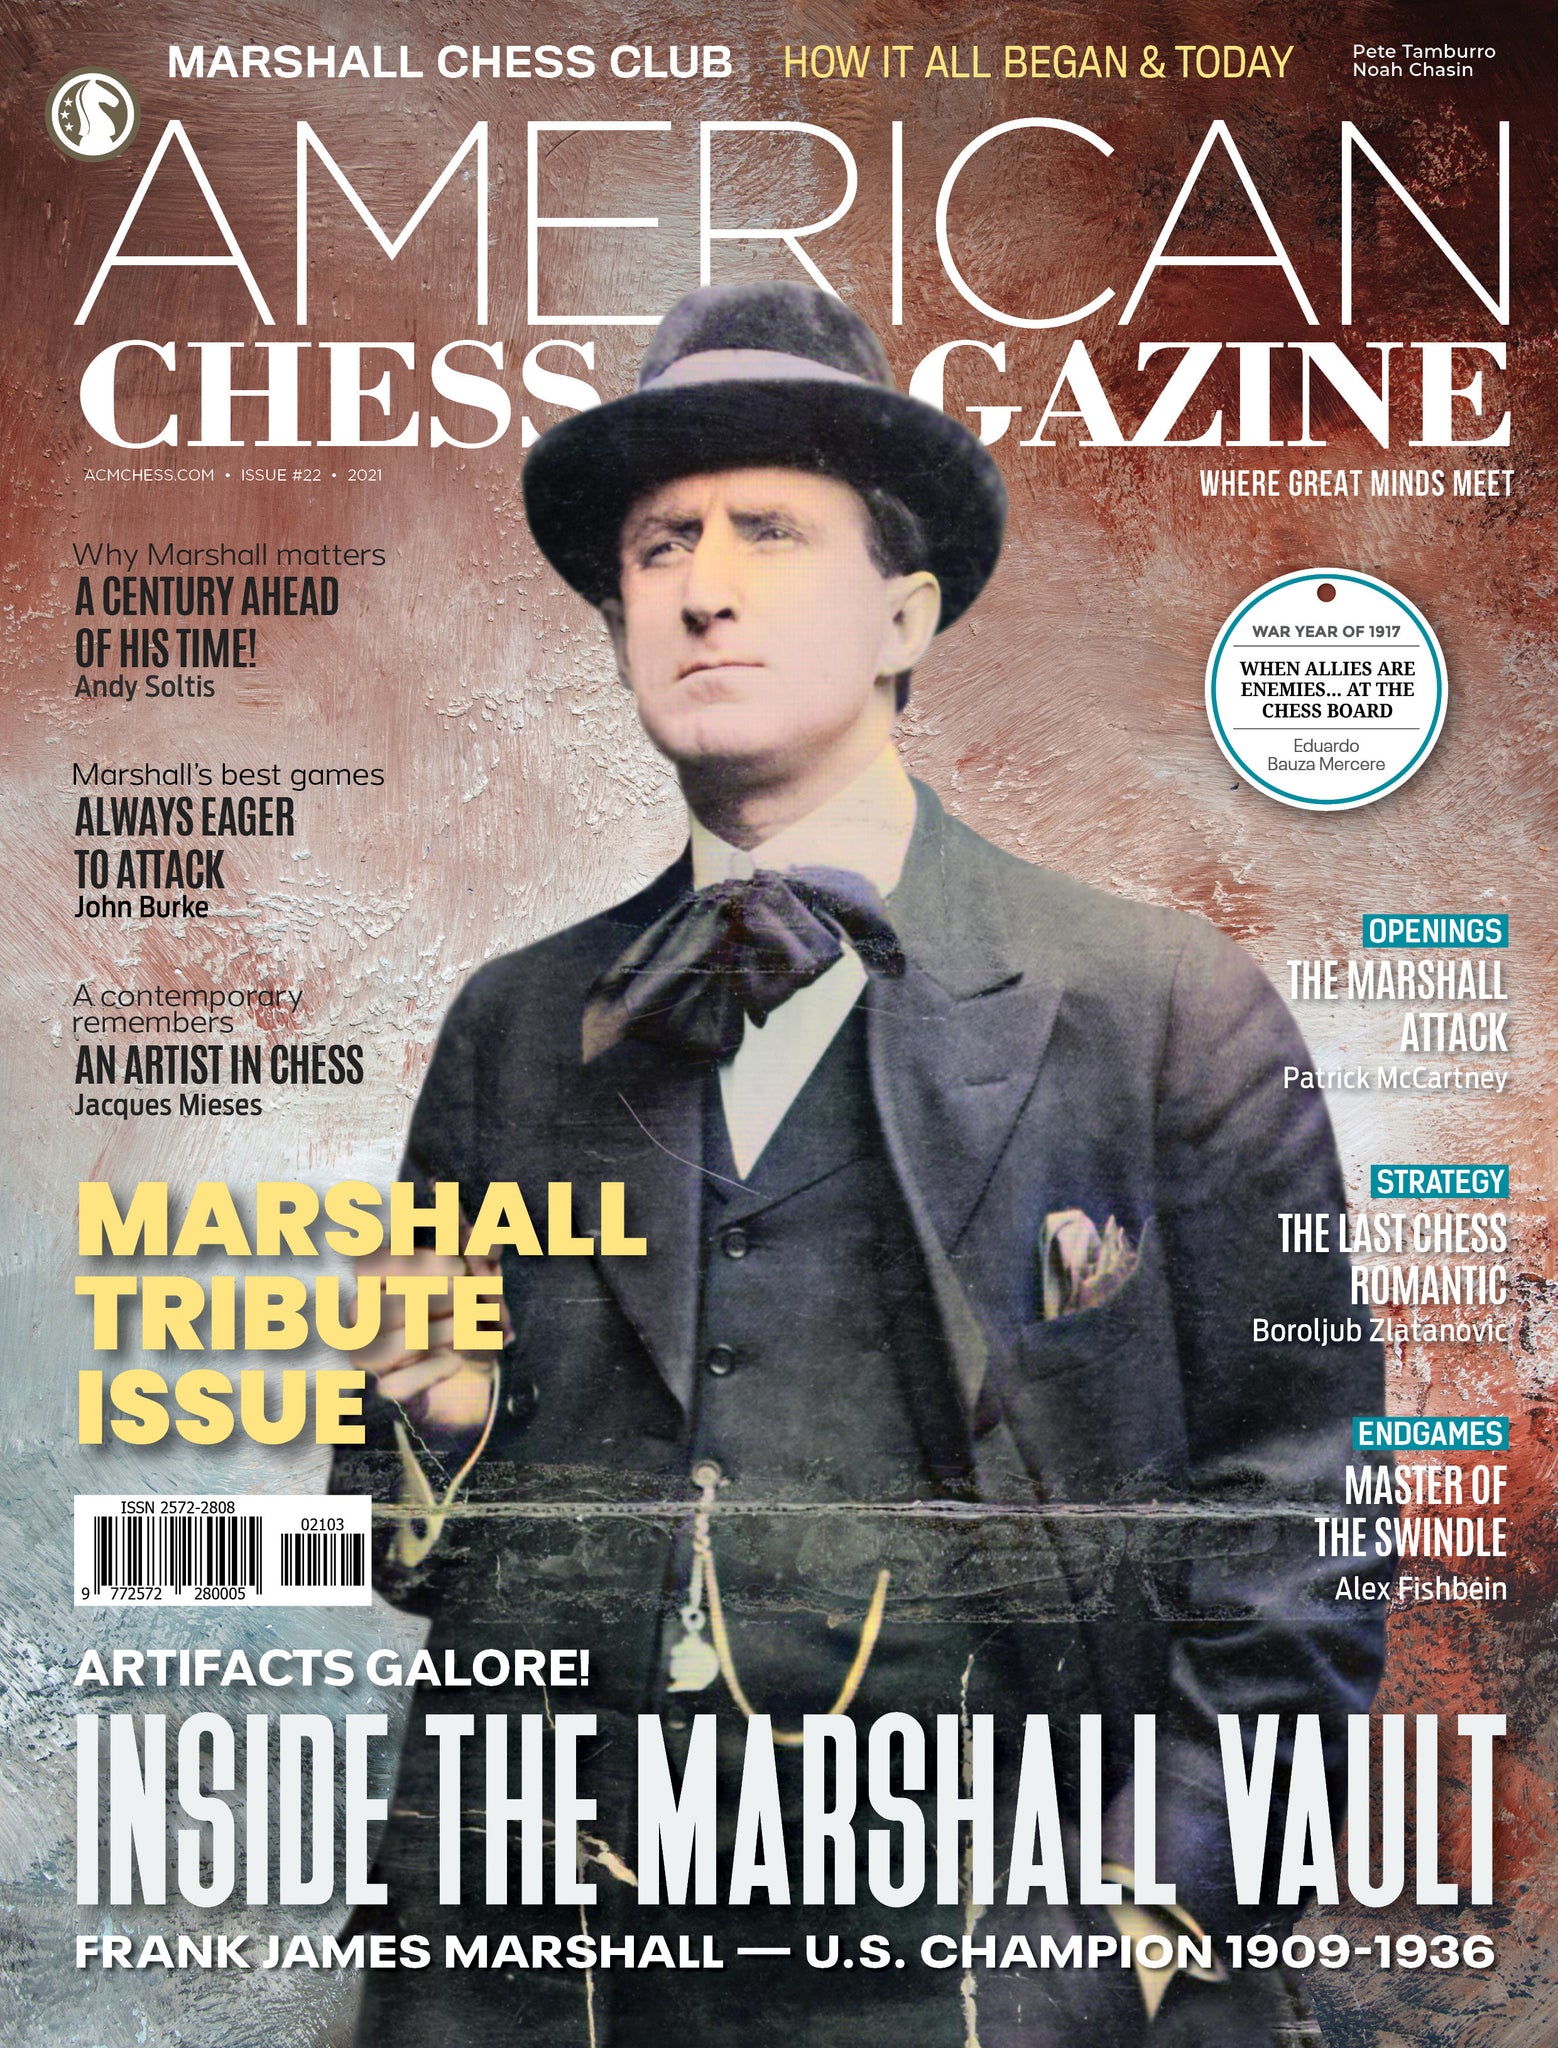 CLEARANCE - AMERICAN CHESS MAGAZINE Issue no. 20